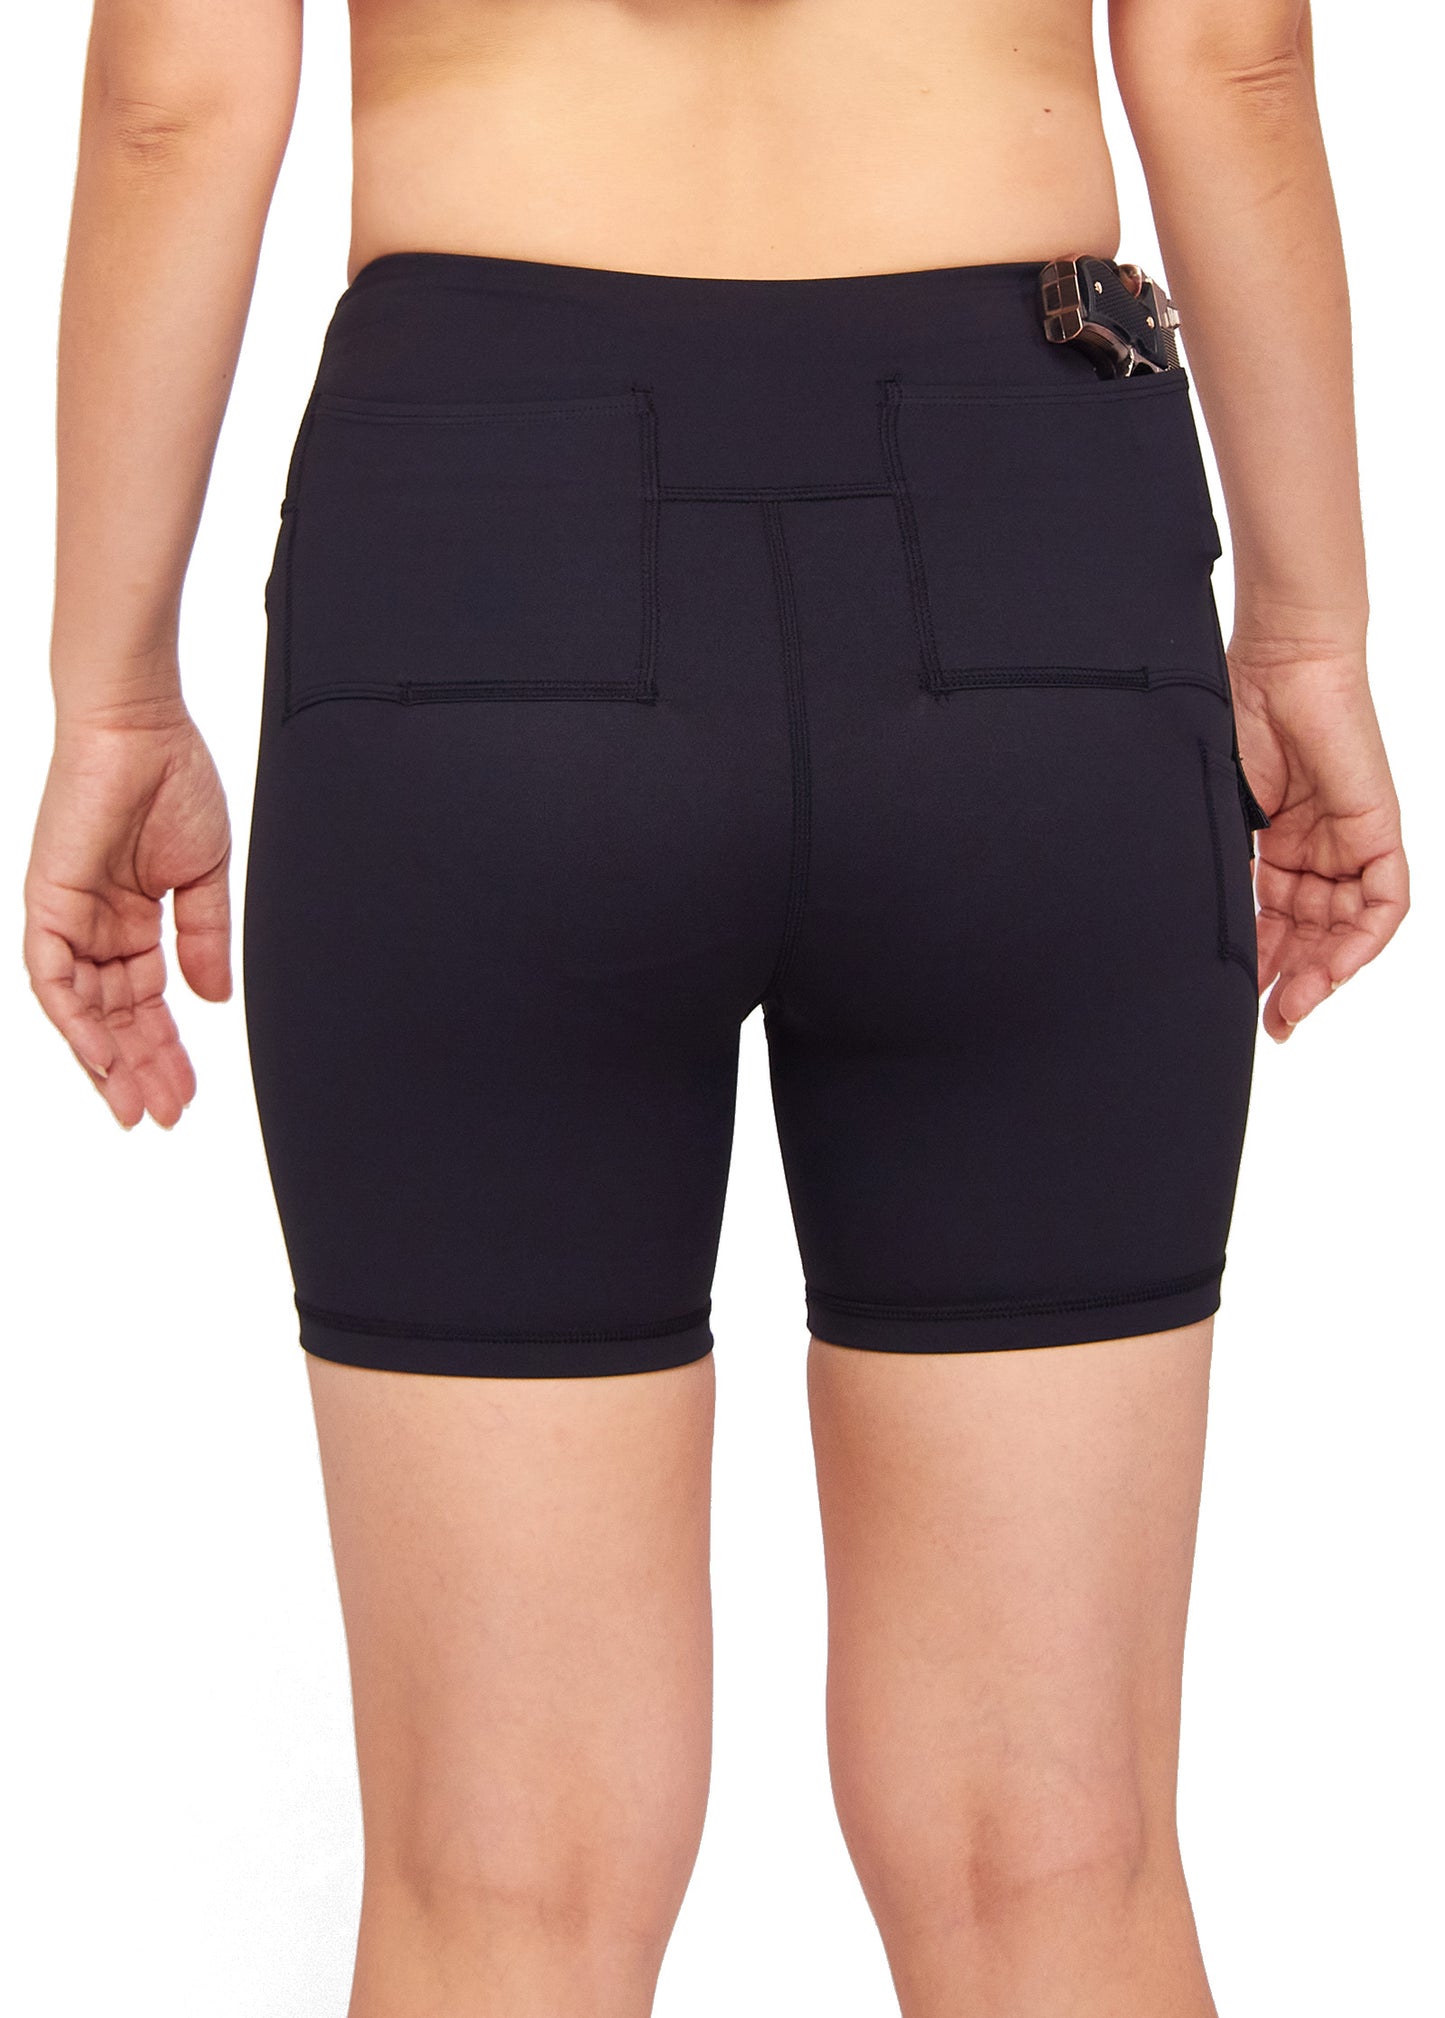 Graystone CCW Women's Two Pocket Holster Short with Outer Thigh